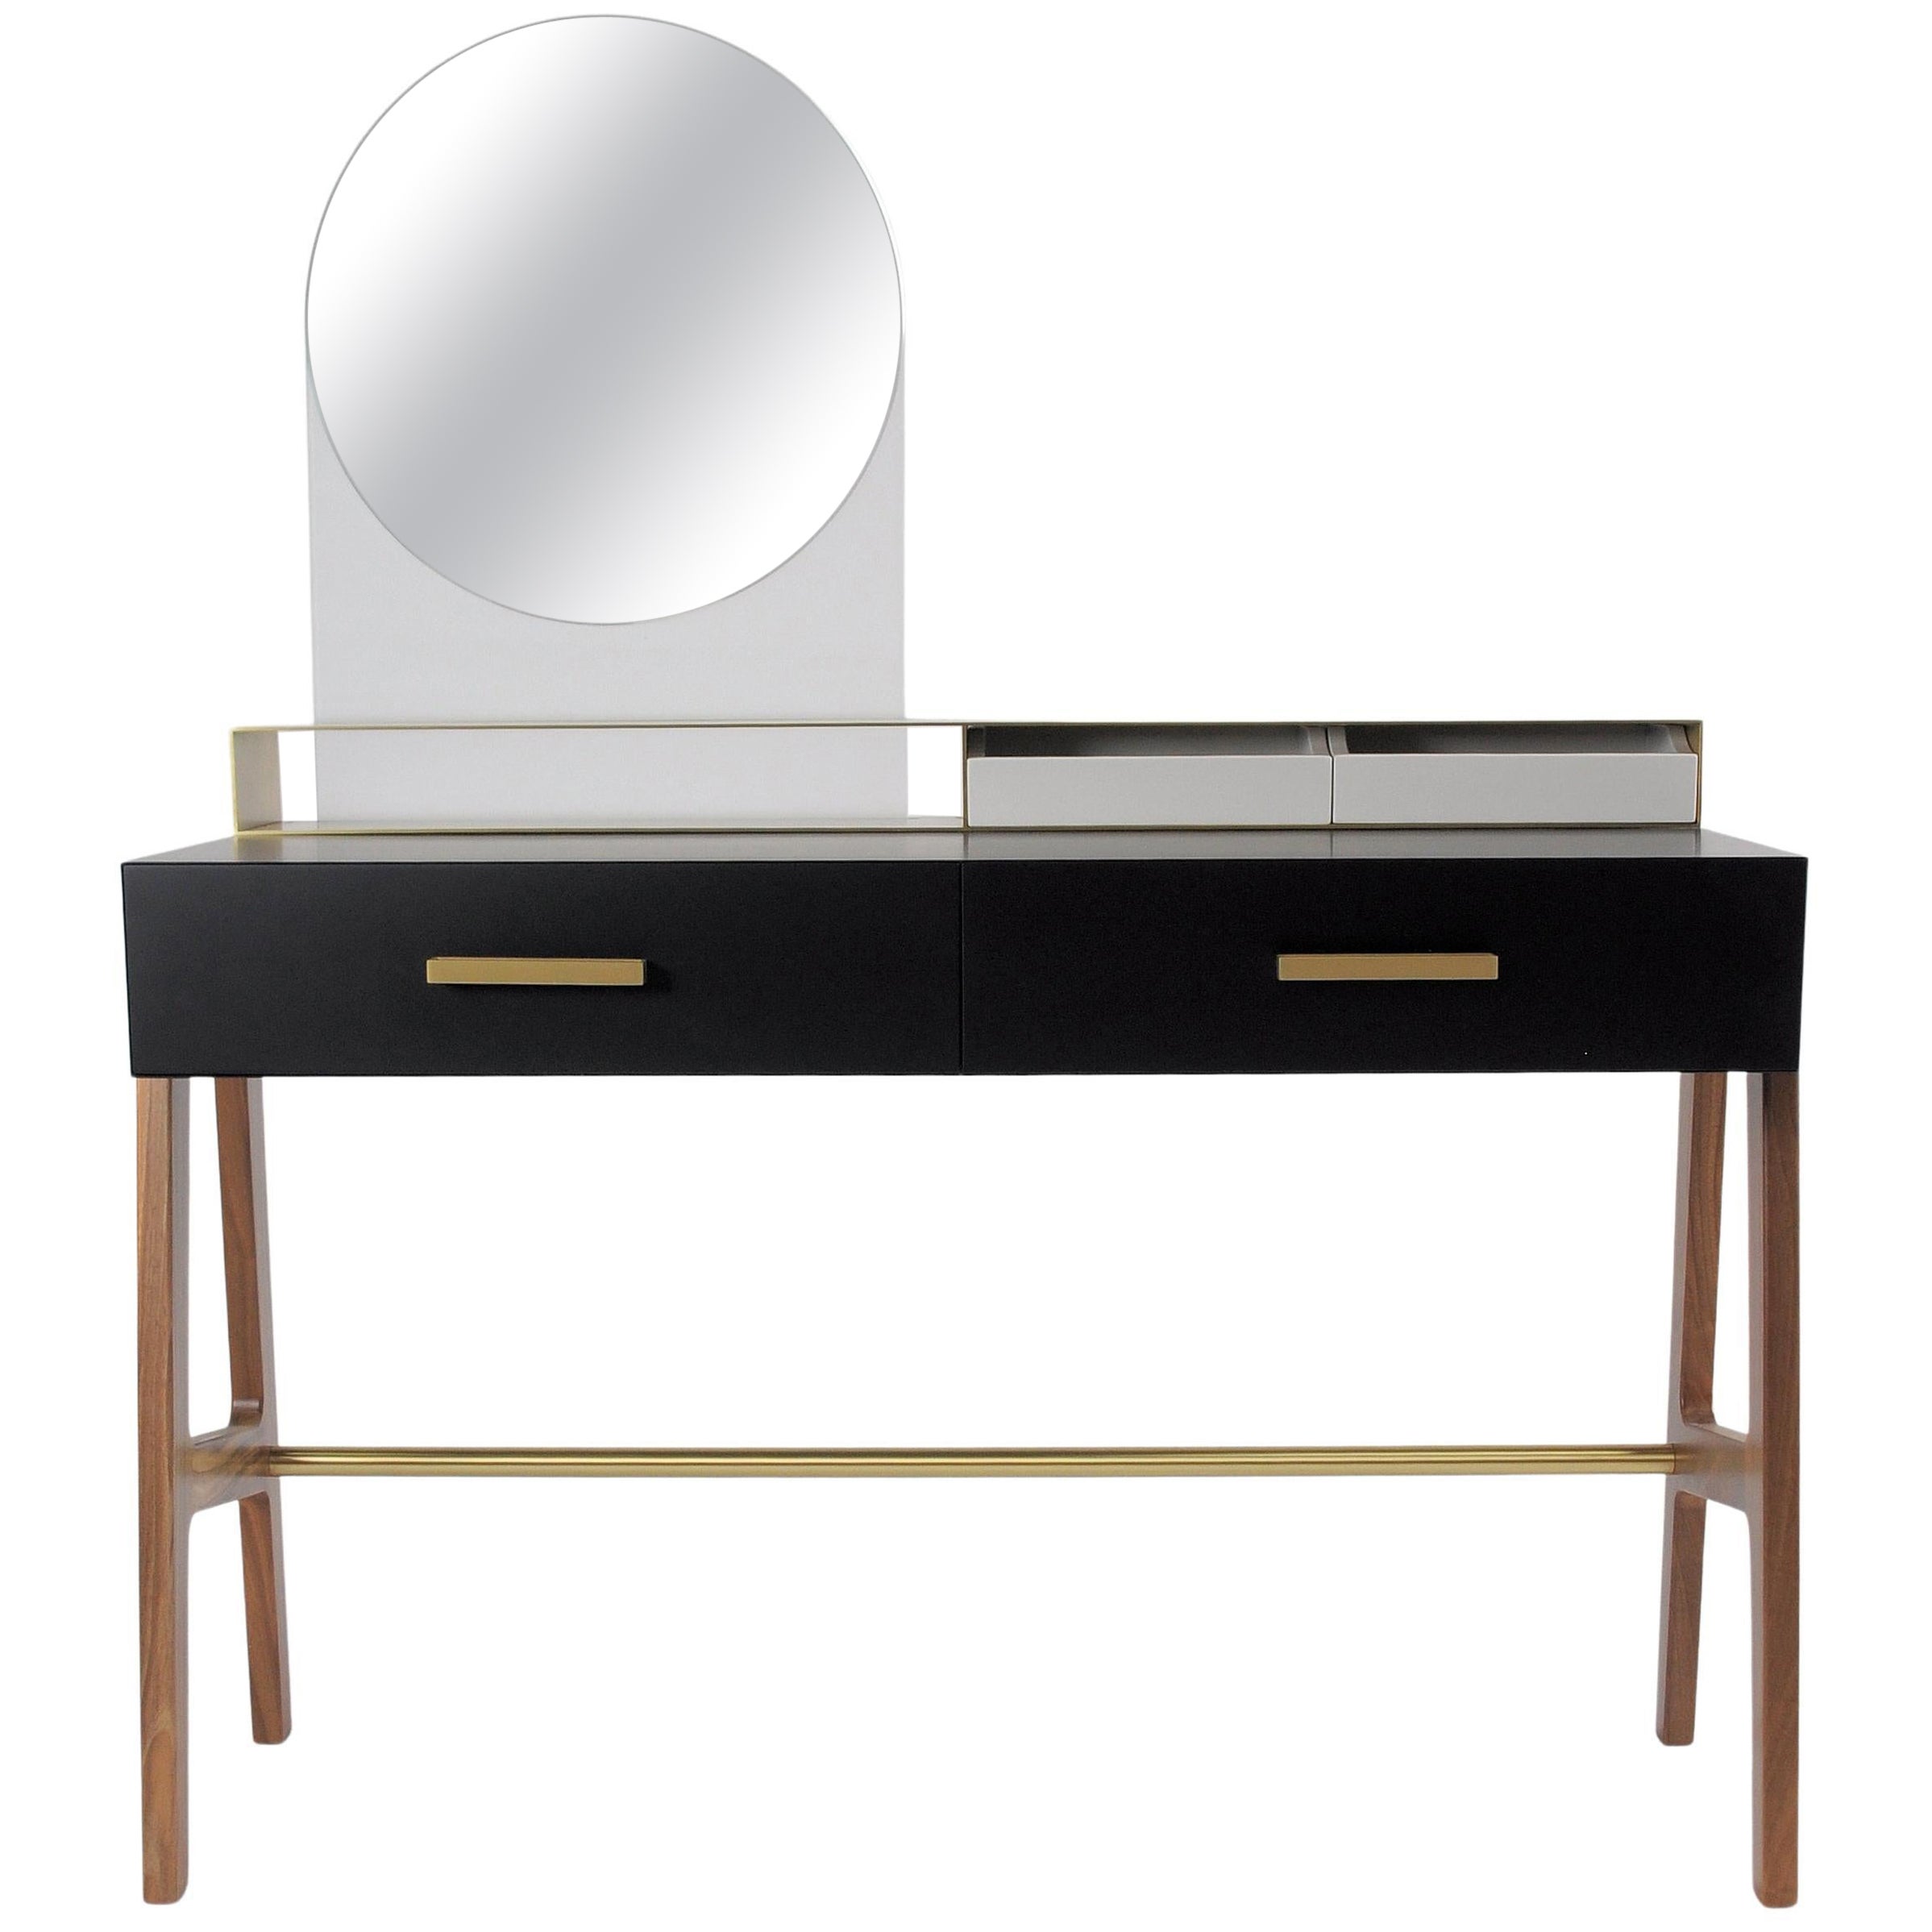 Contemporary Beauty Desk, Makeup Table, Jewel Case, Mirror. Lacquered Oak, Brass For Sale